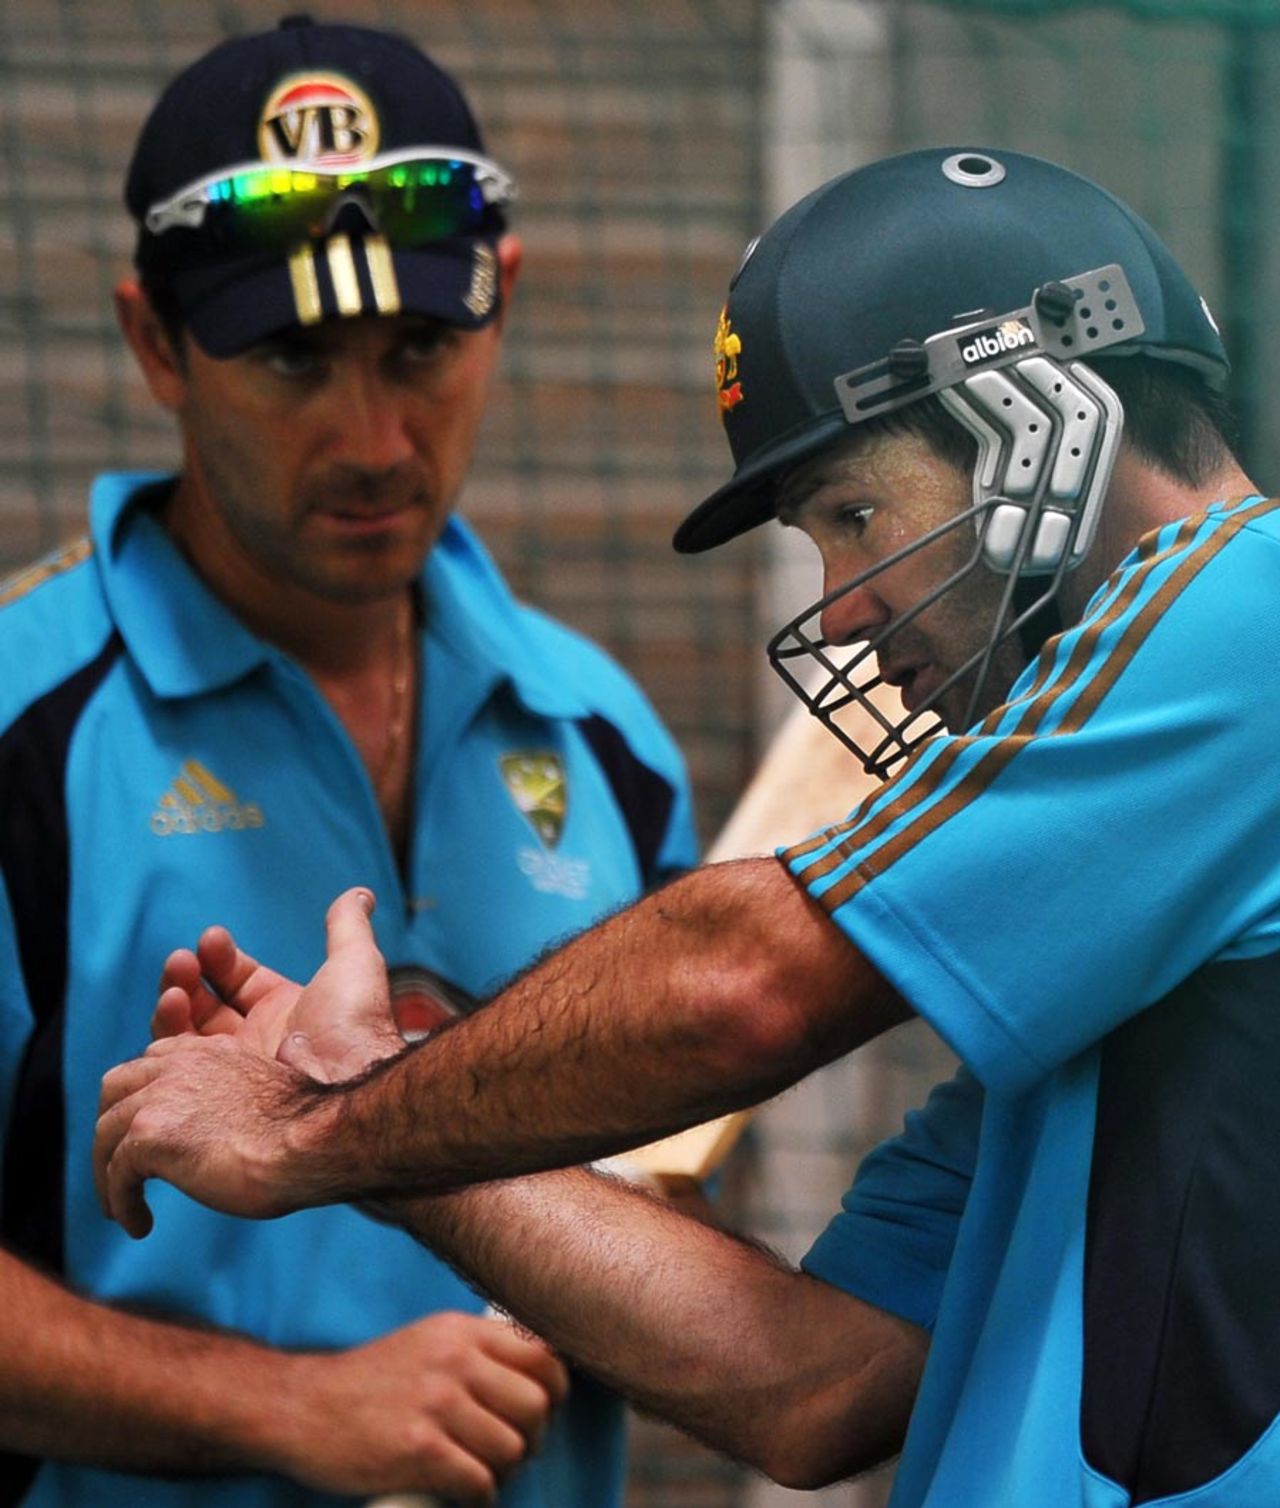 Ricky Ponting discusses a shot with batting coach Justin Langer, Chandigarh, September 23, 2010